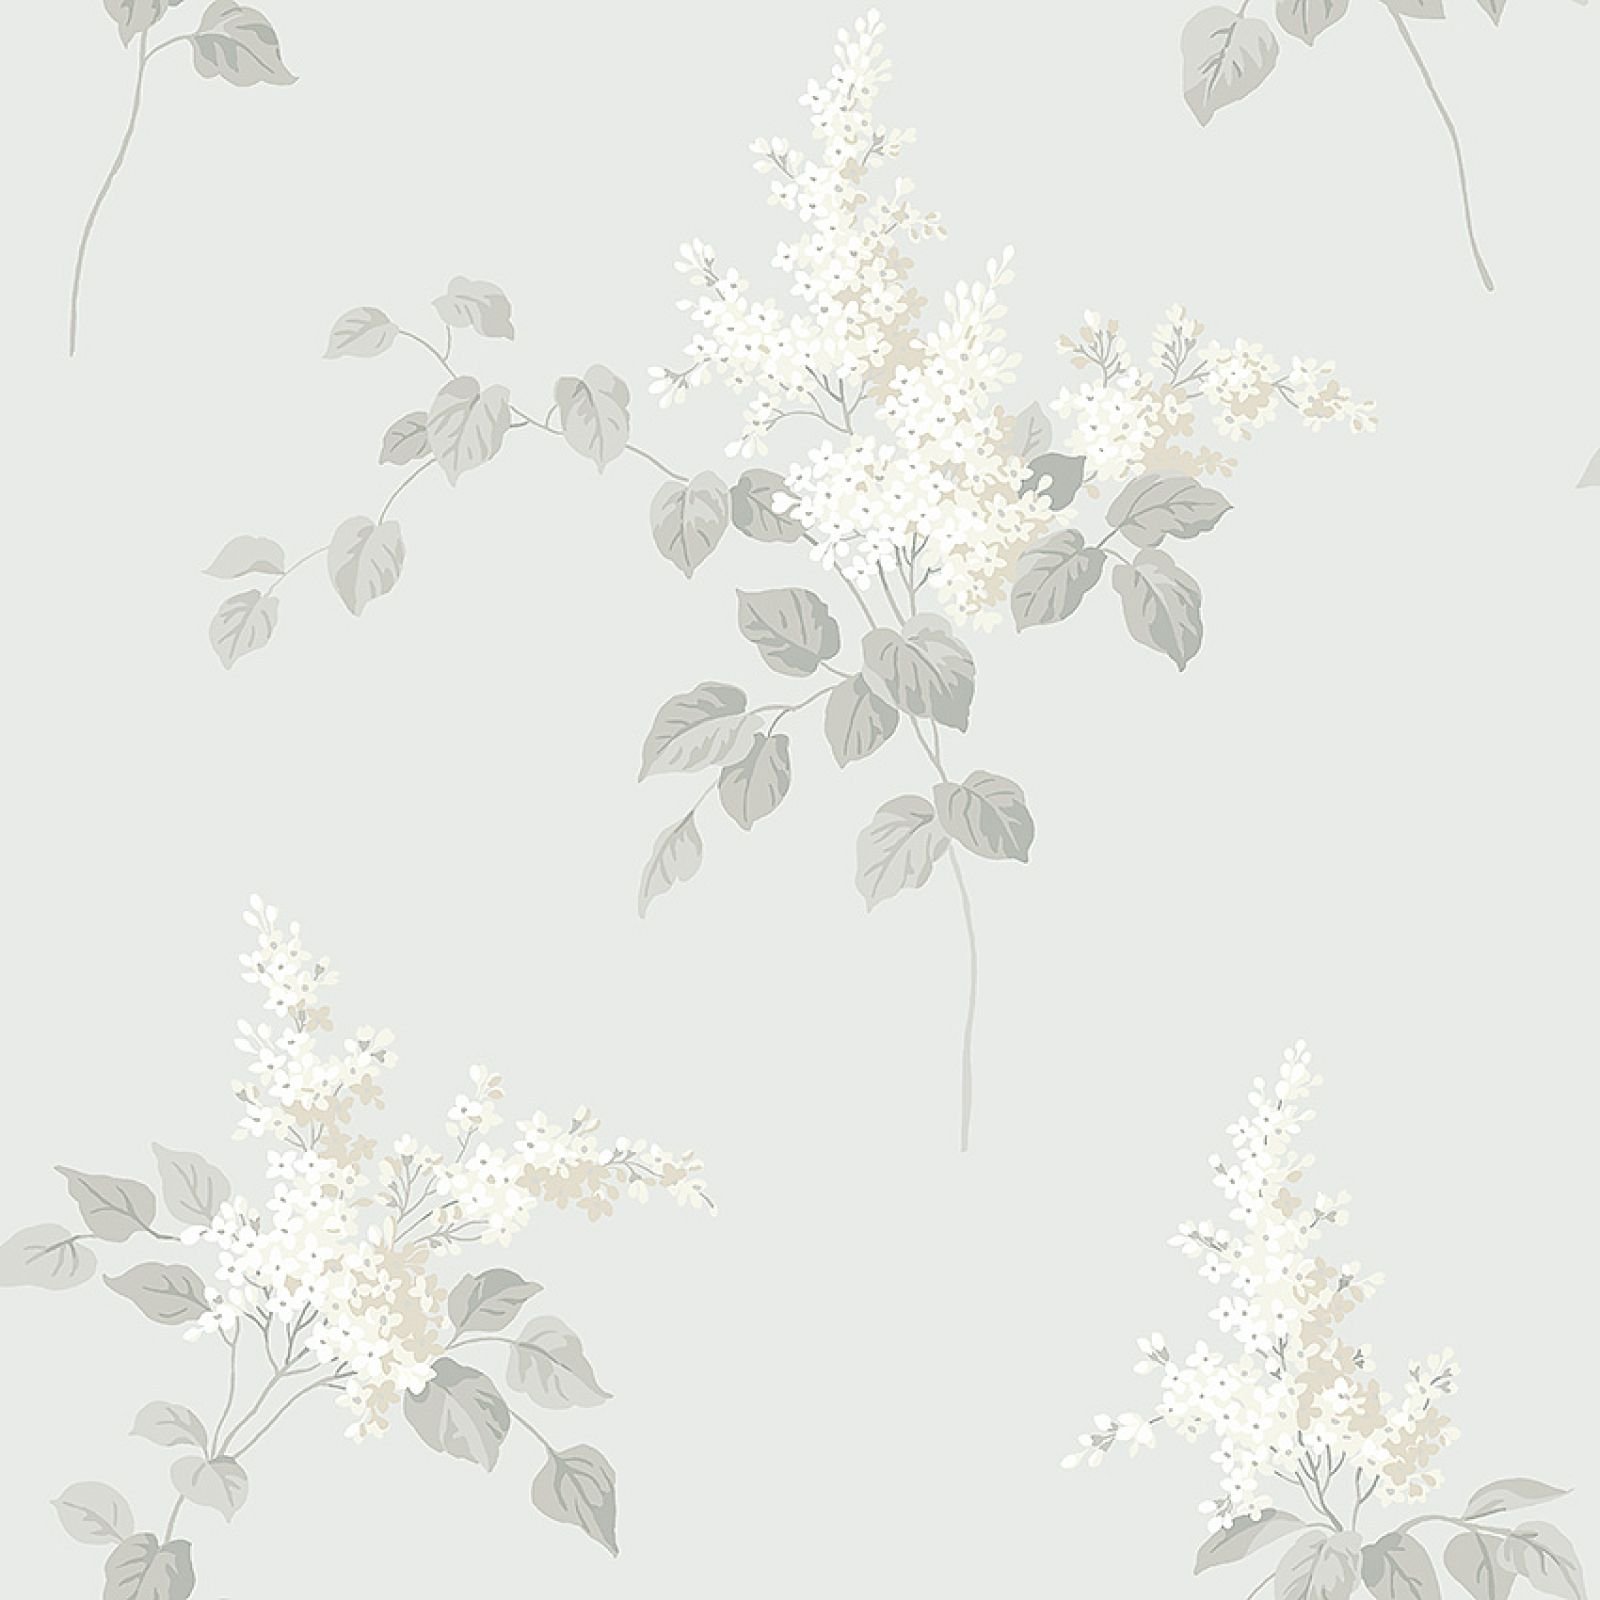 Lilacs wallpaper with a choice of 3 colourways